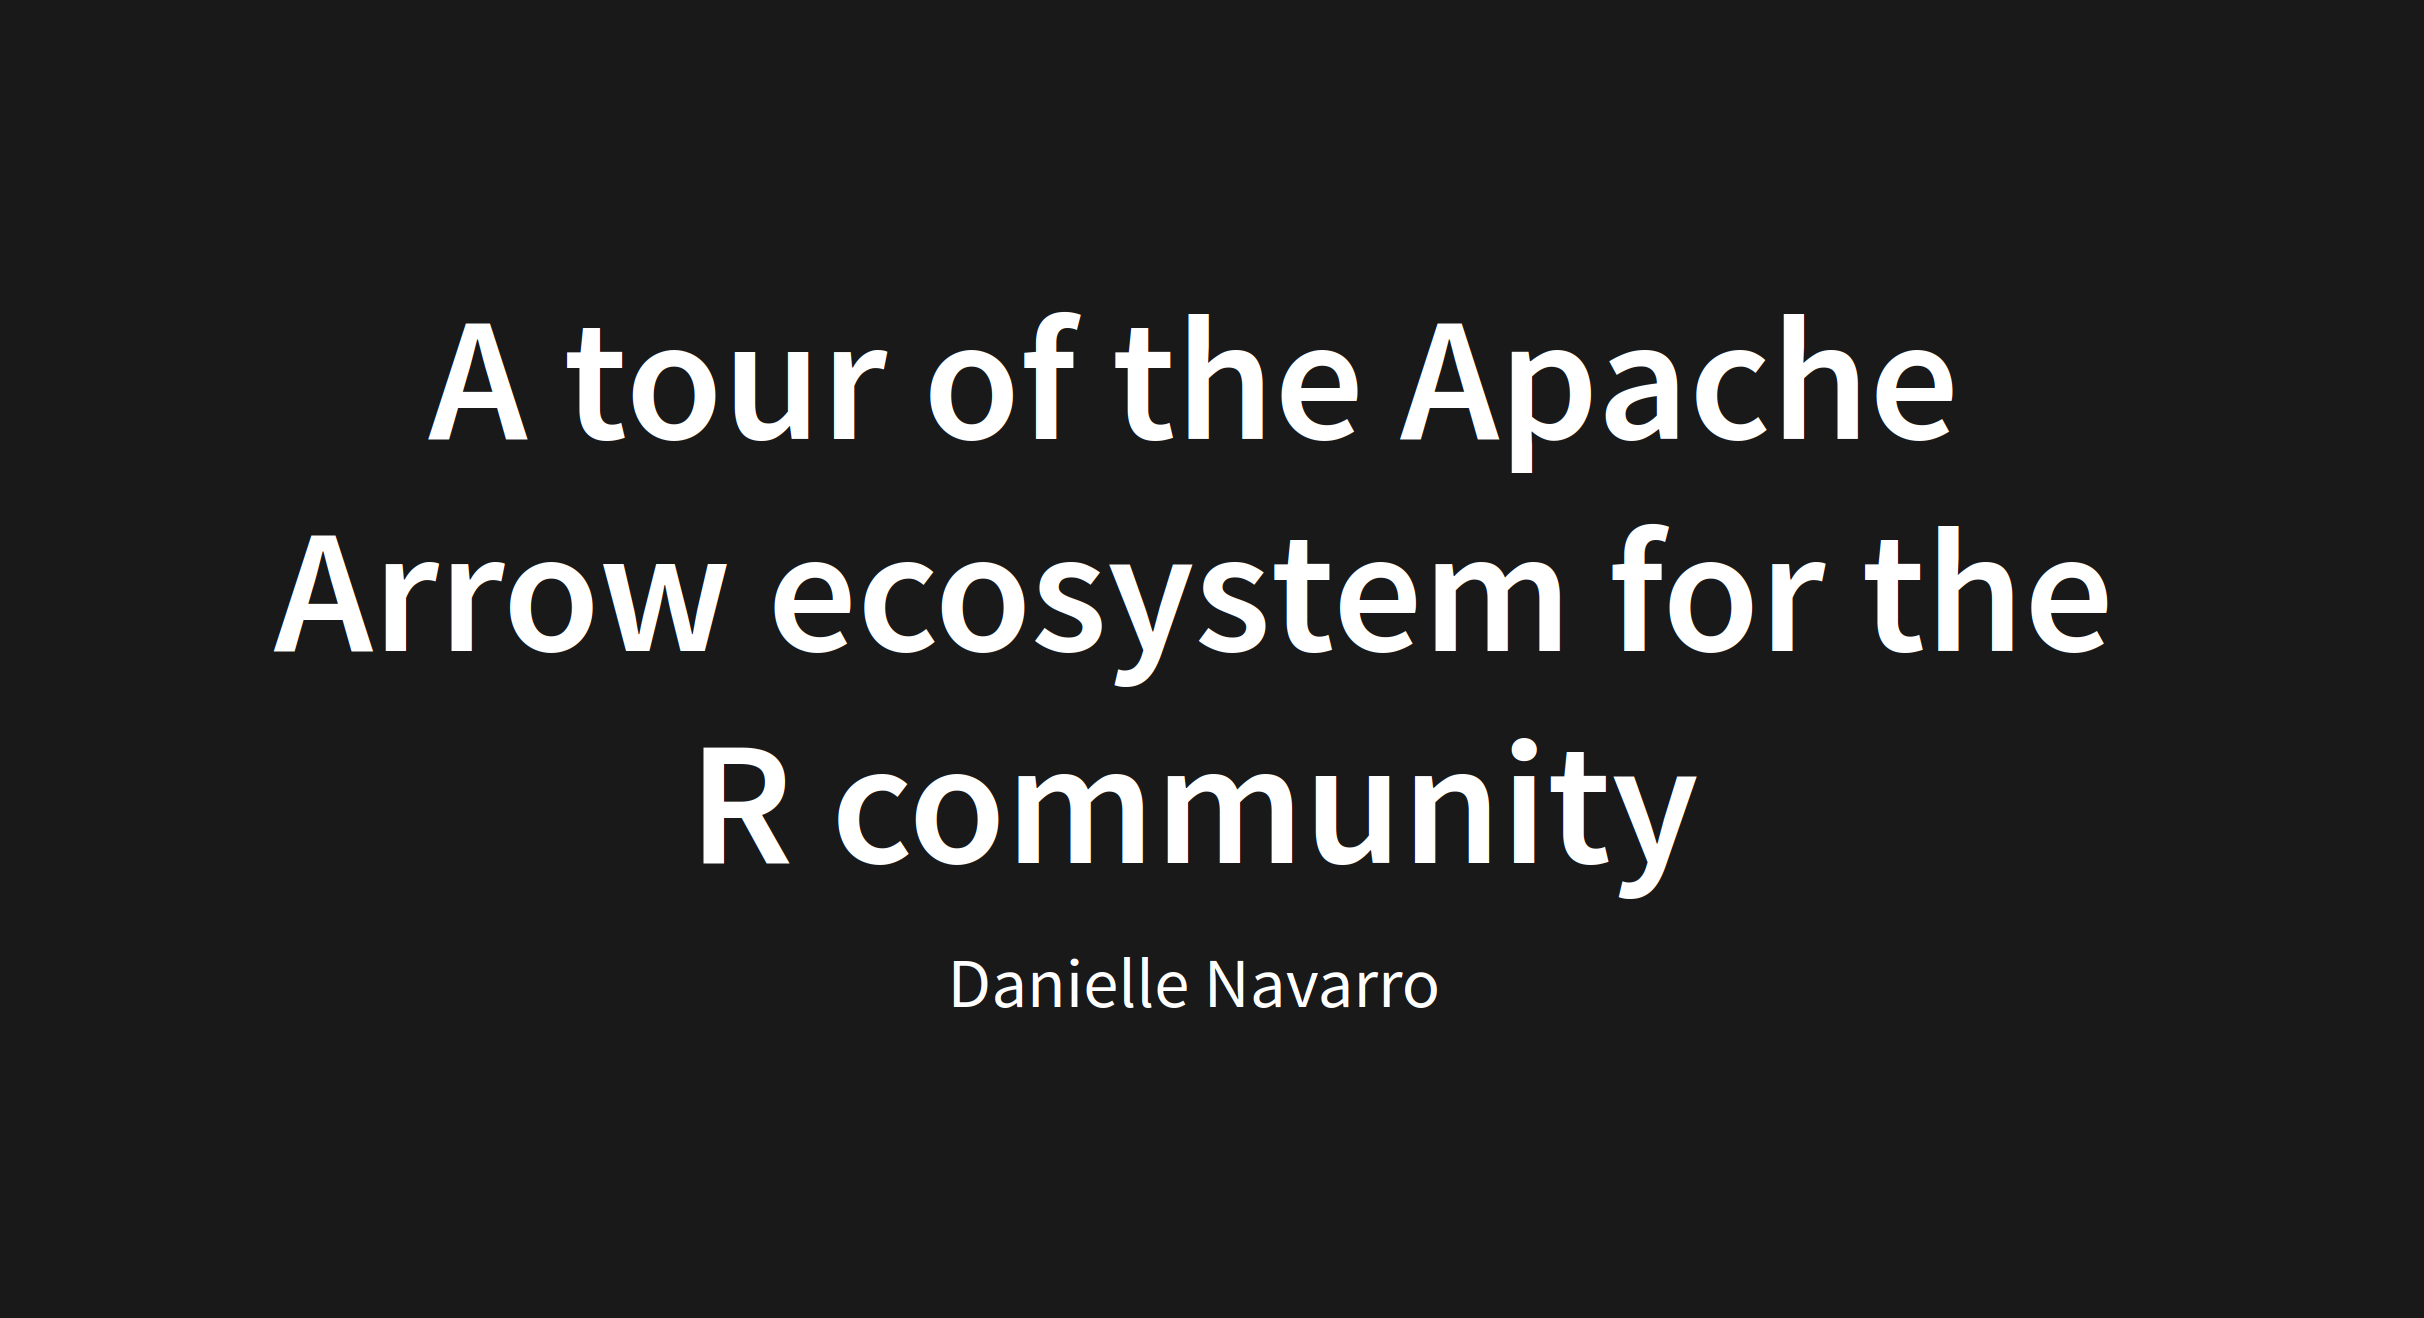 A tour of the Apache Arrow ecosystem for the R community slides